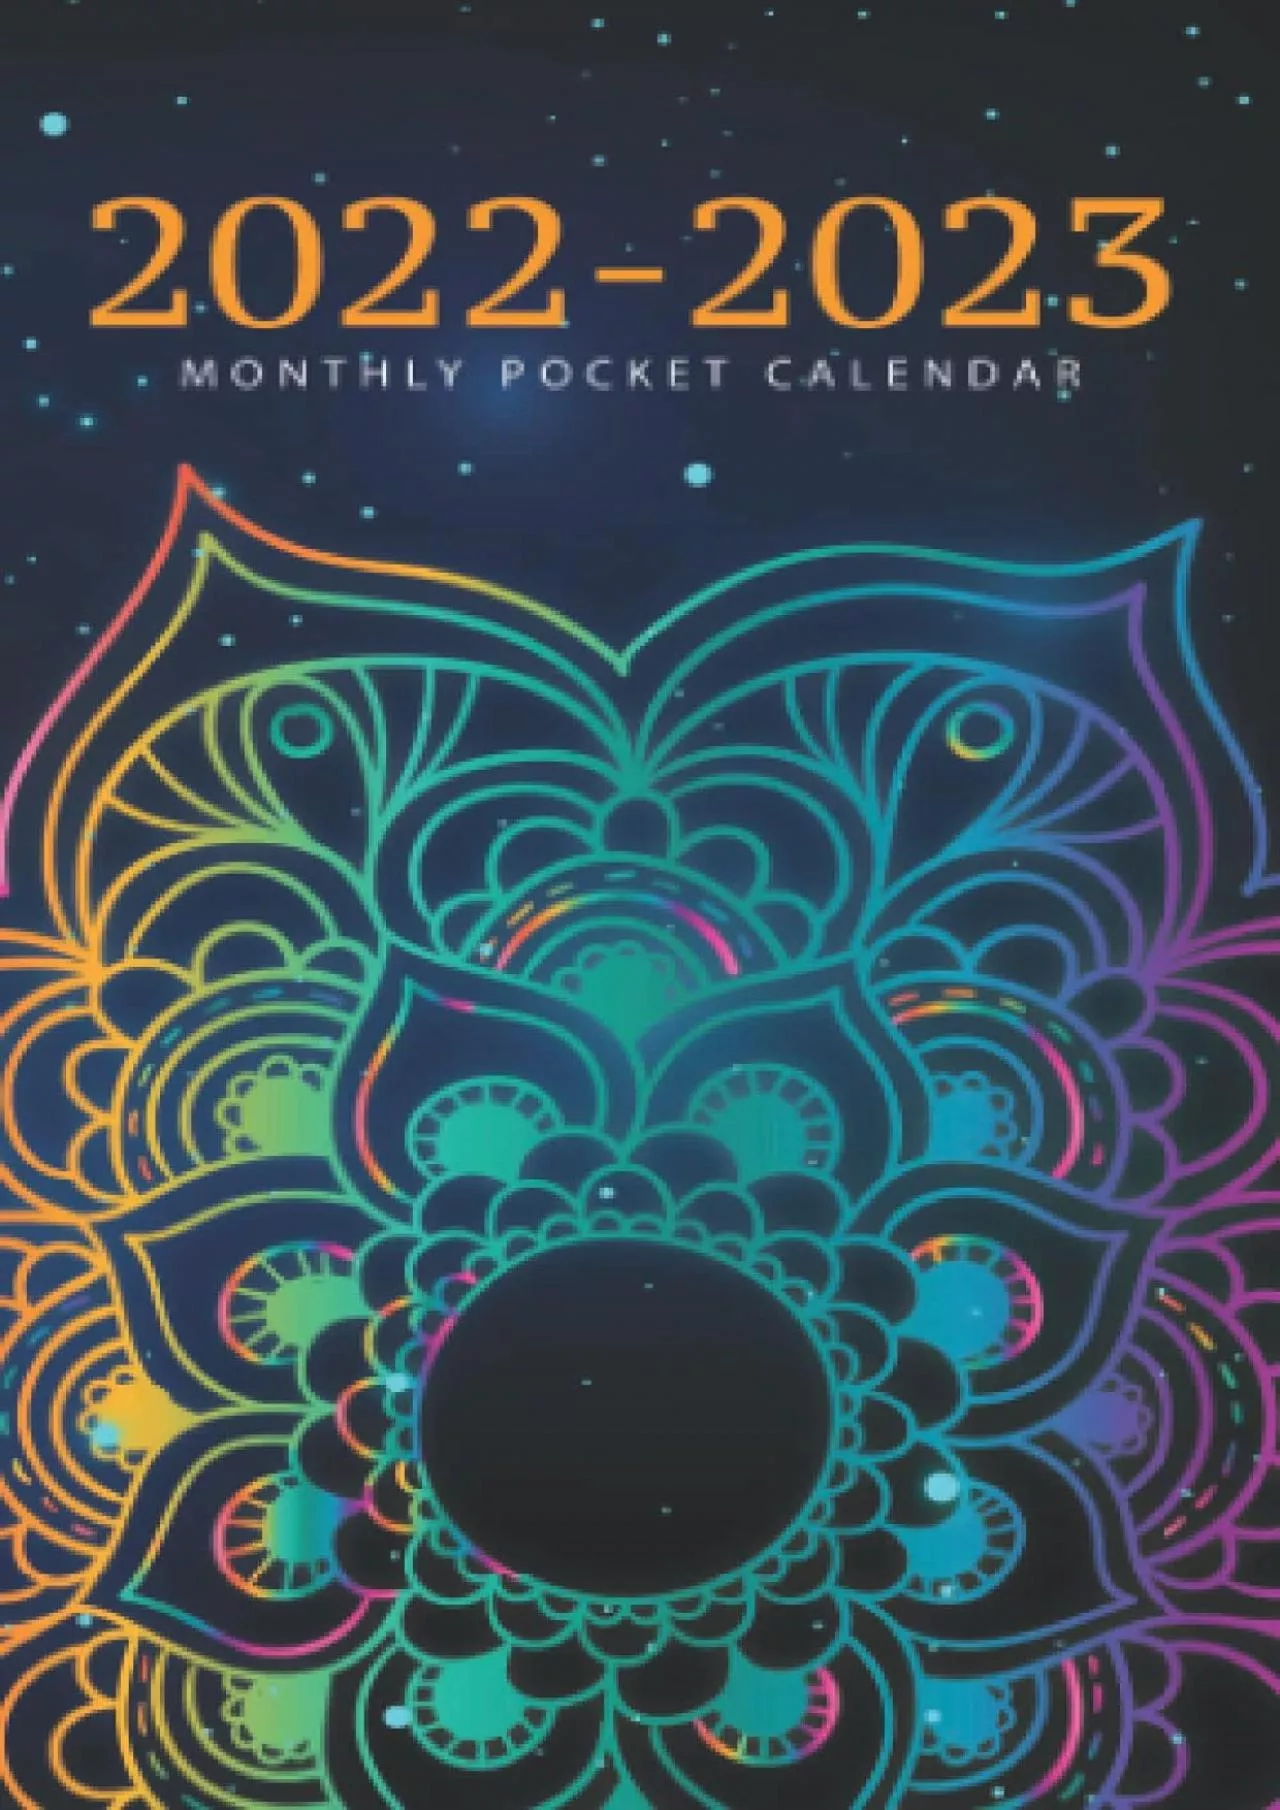 2022-2023 Monthly Pocket Calendar: Colorful Mandala Cover Design 2 Year Planner Small